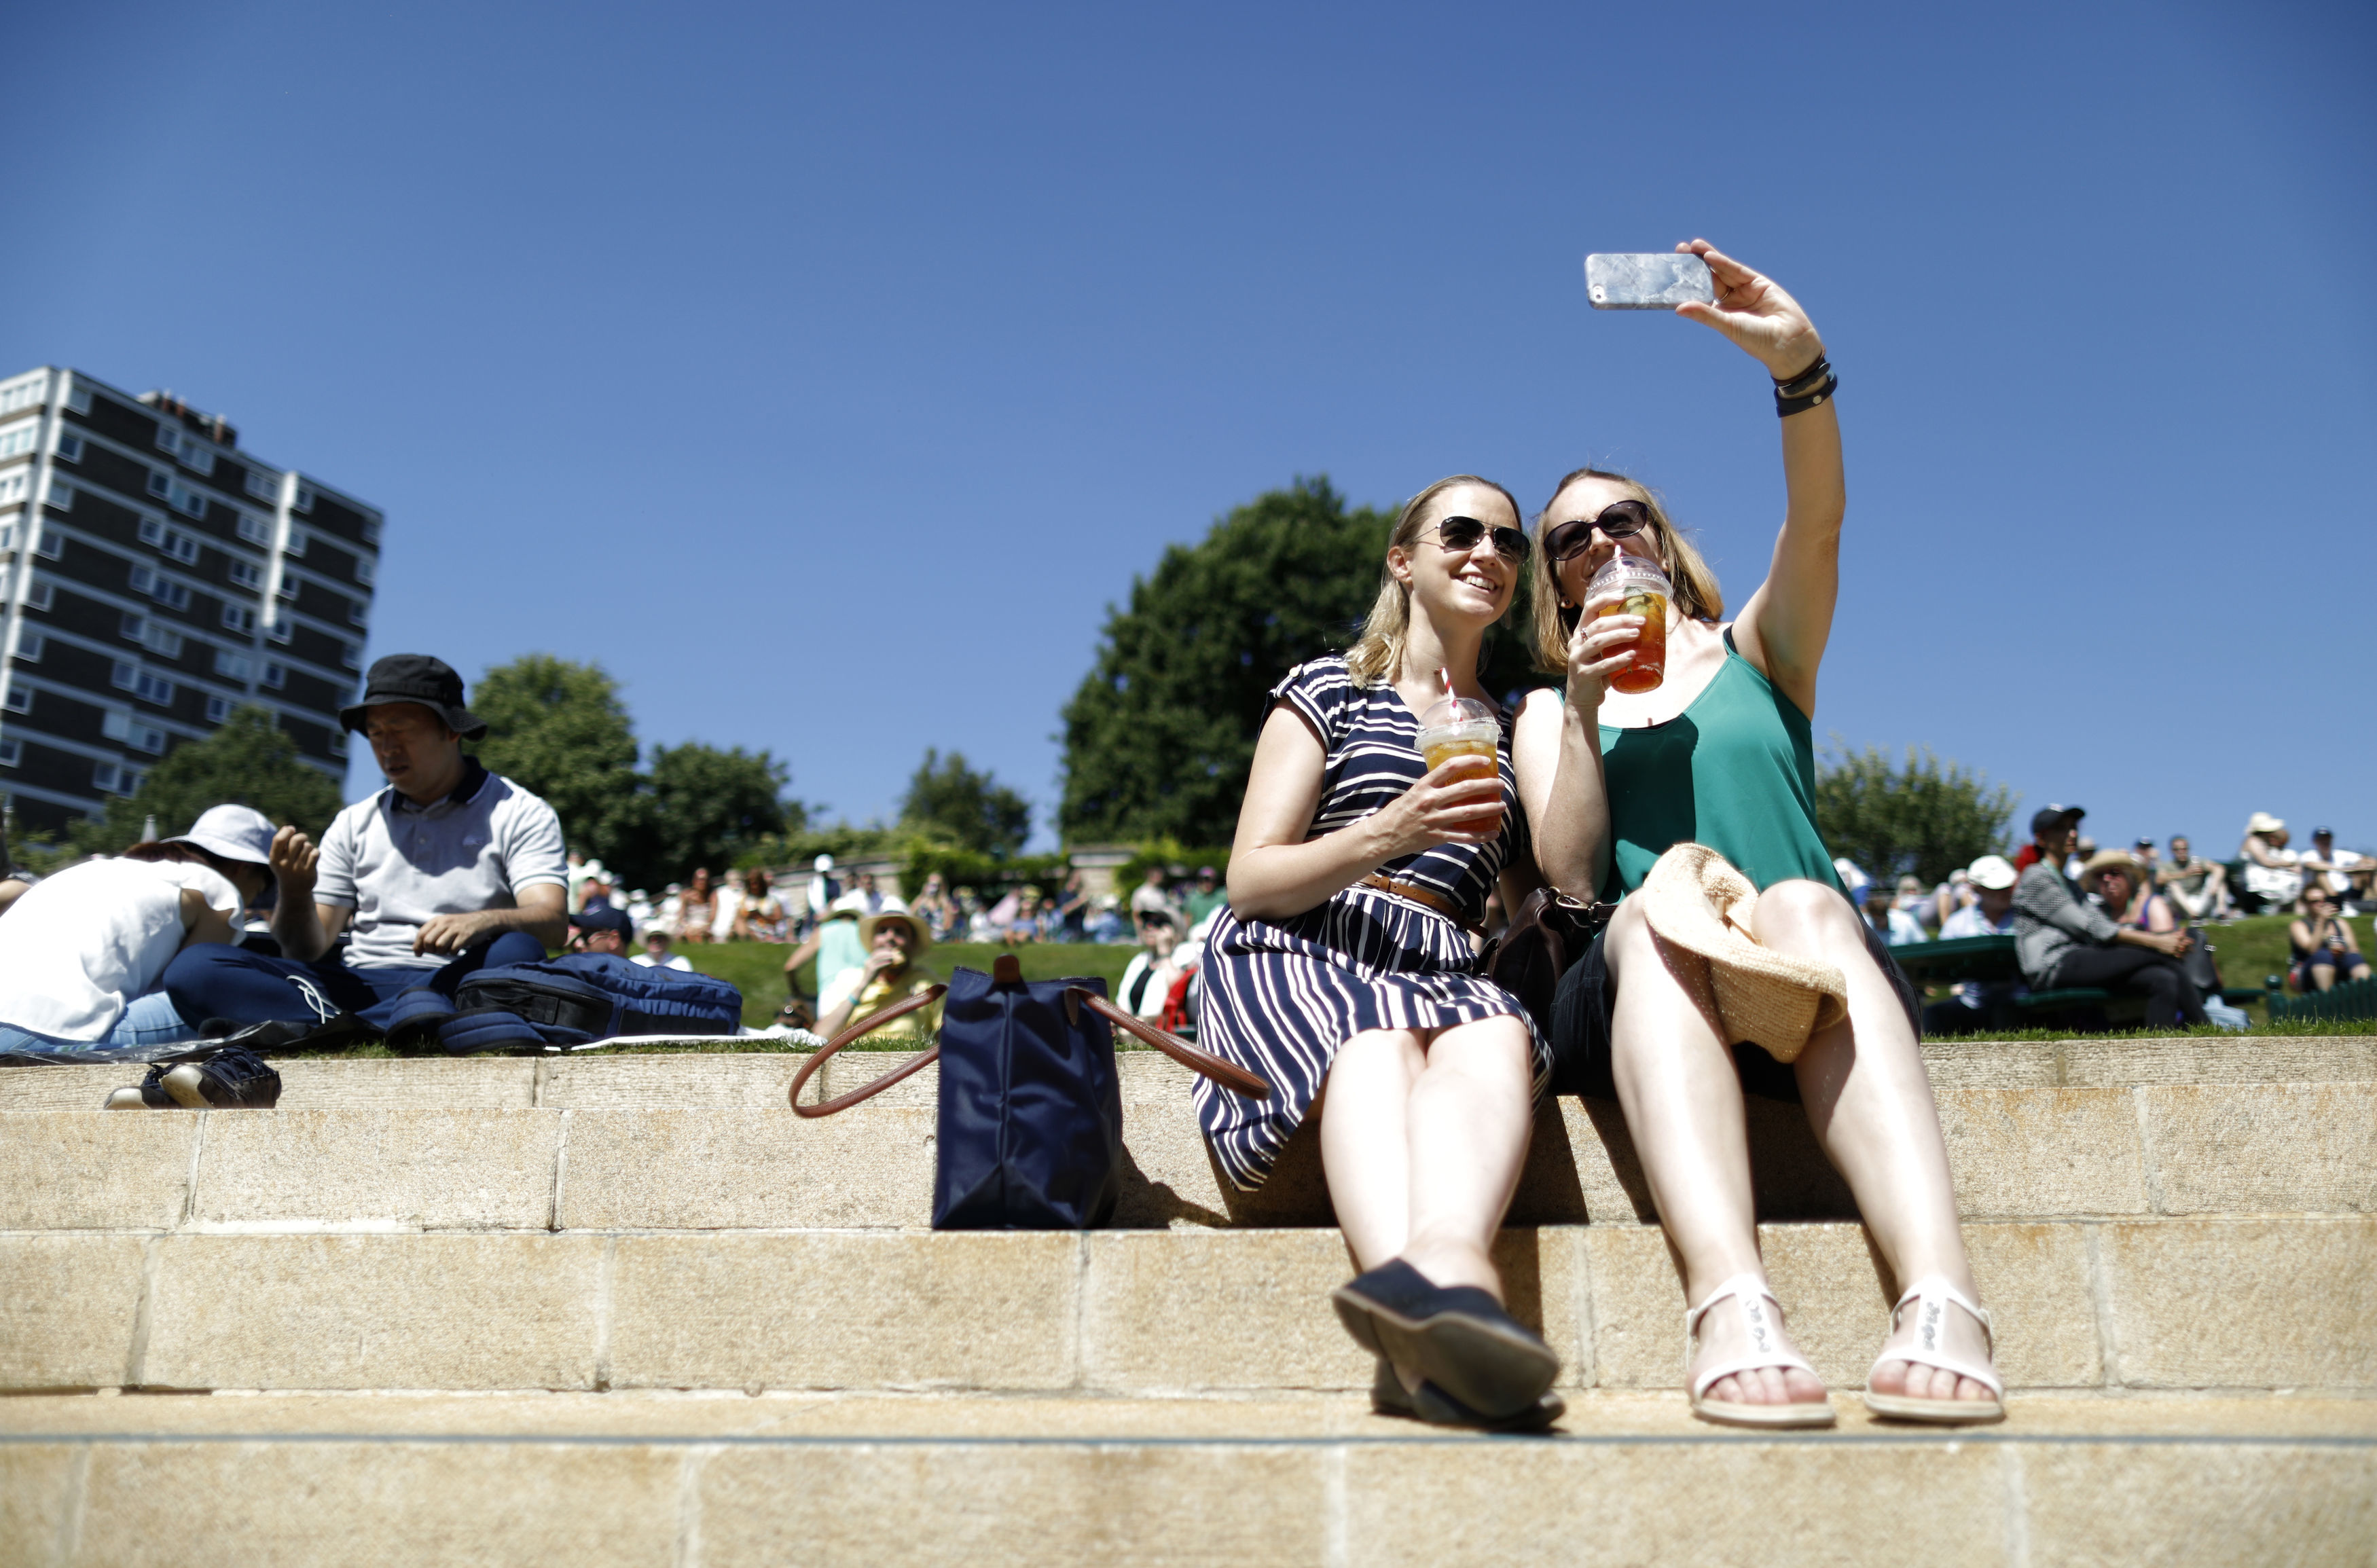 Spectators take a selfie on day one of the Wimbledon Championships at the All England Lawn Tennis and Croquet Club